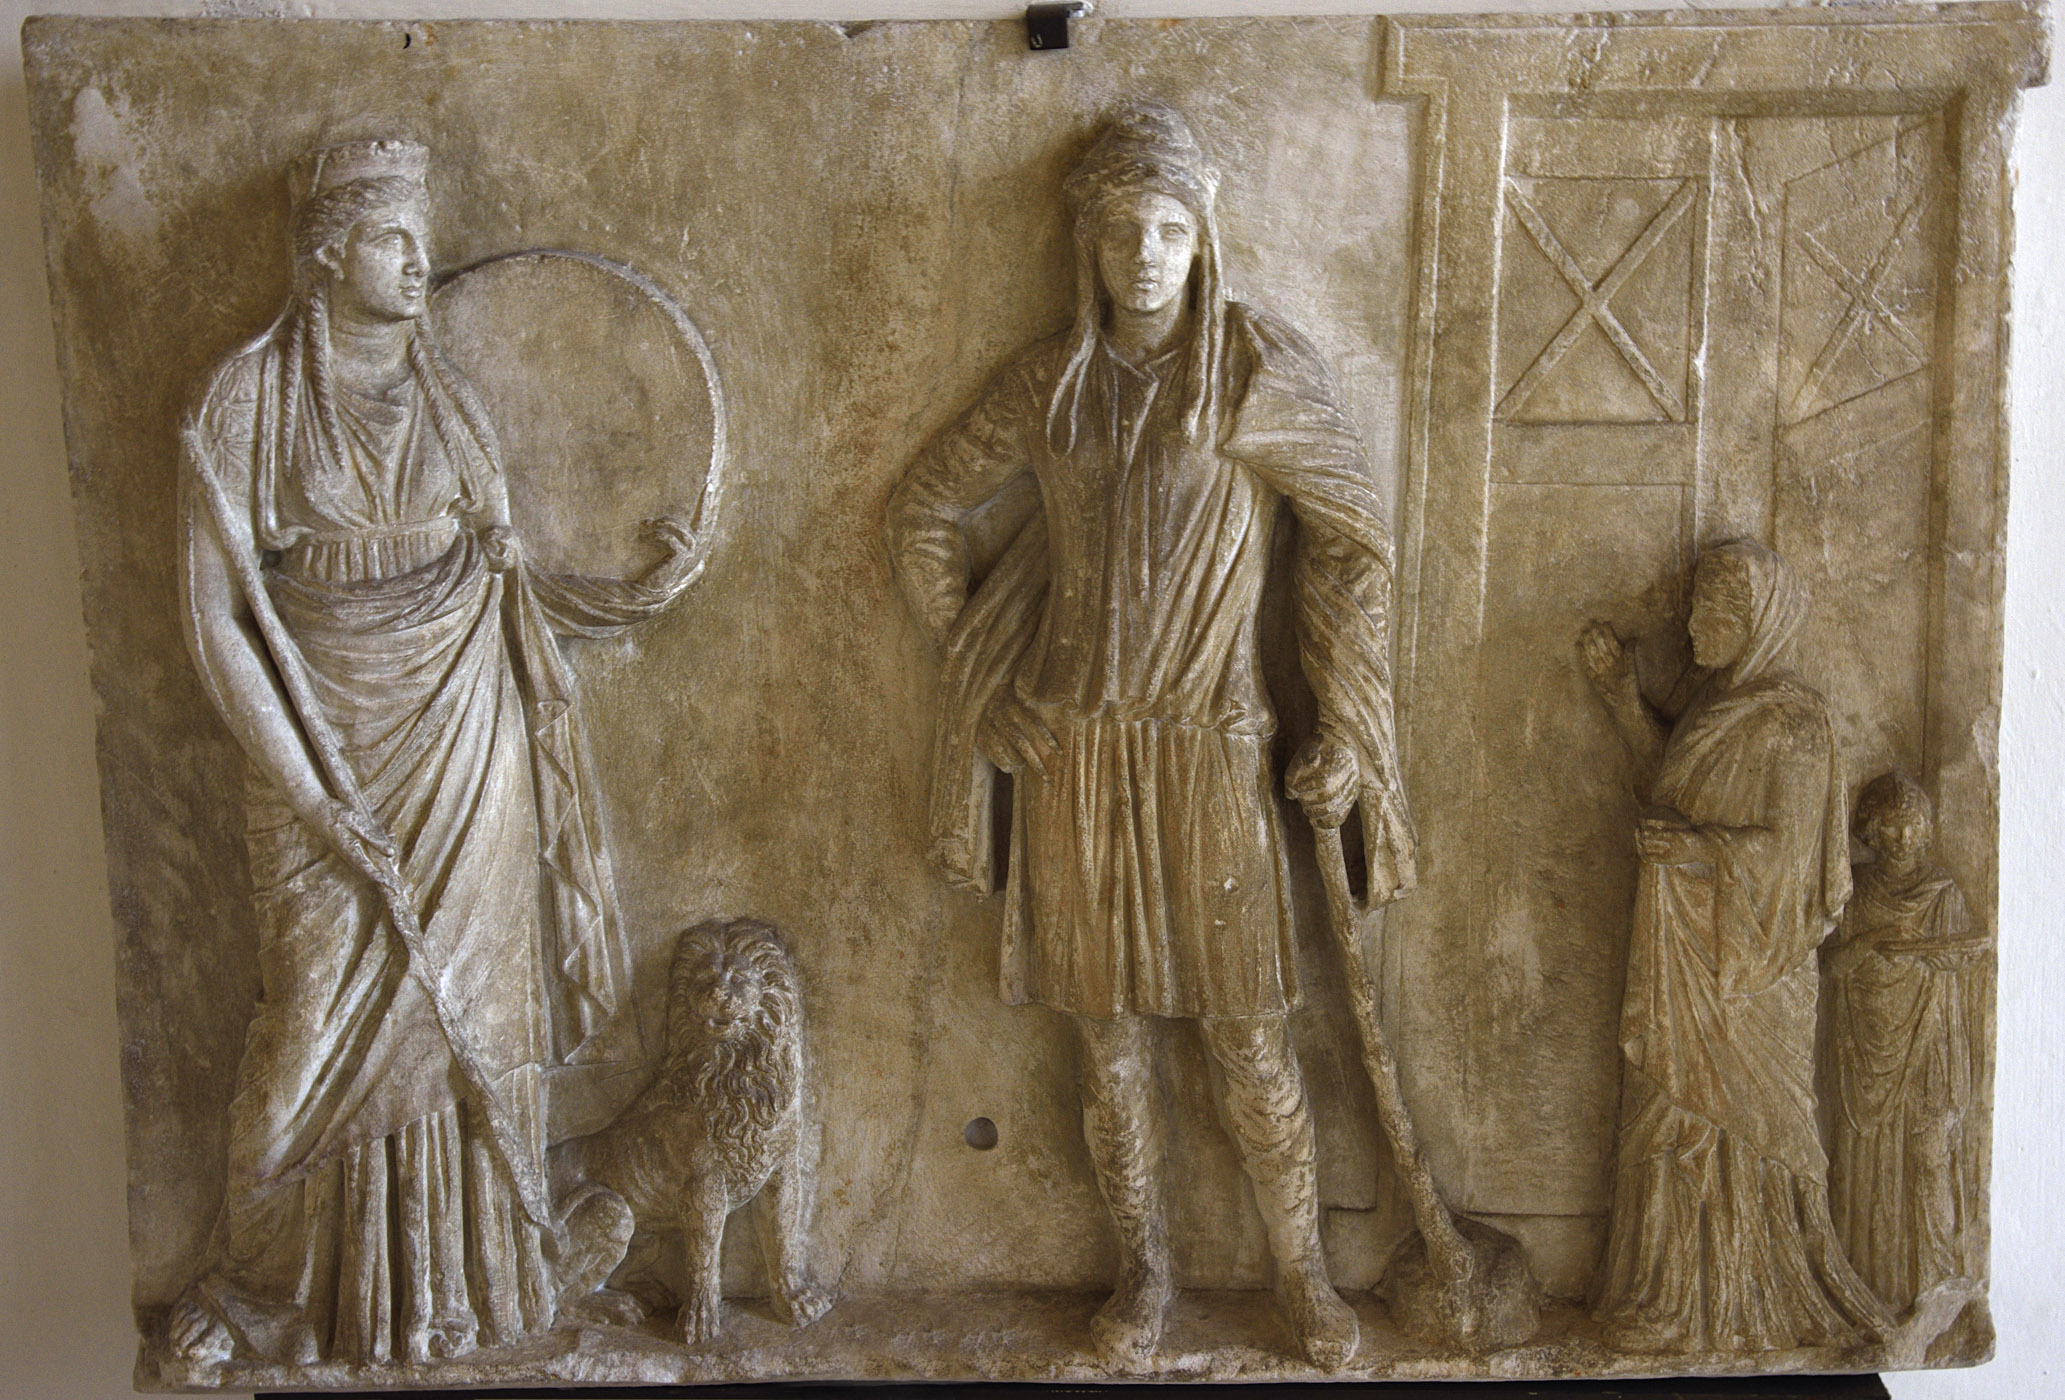 Votive relief of Cybele and Attis